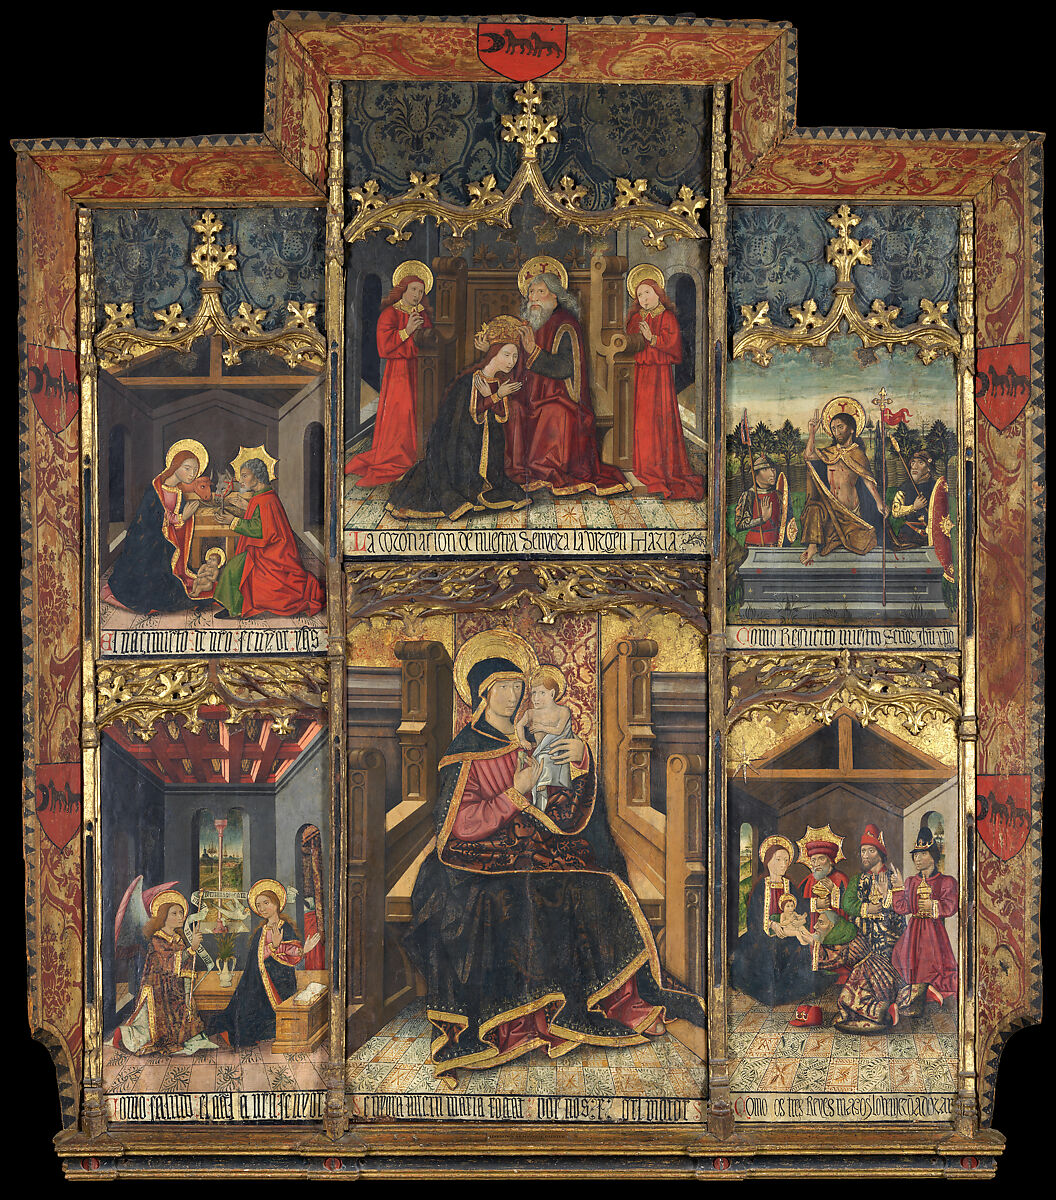 Virgin and Child Enthroned with Scenes from the Life of the Virgin, Morata Master (Spanish, Aragonese, late 15th century), Tempera and gold on wood 